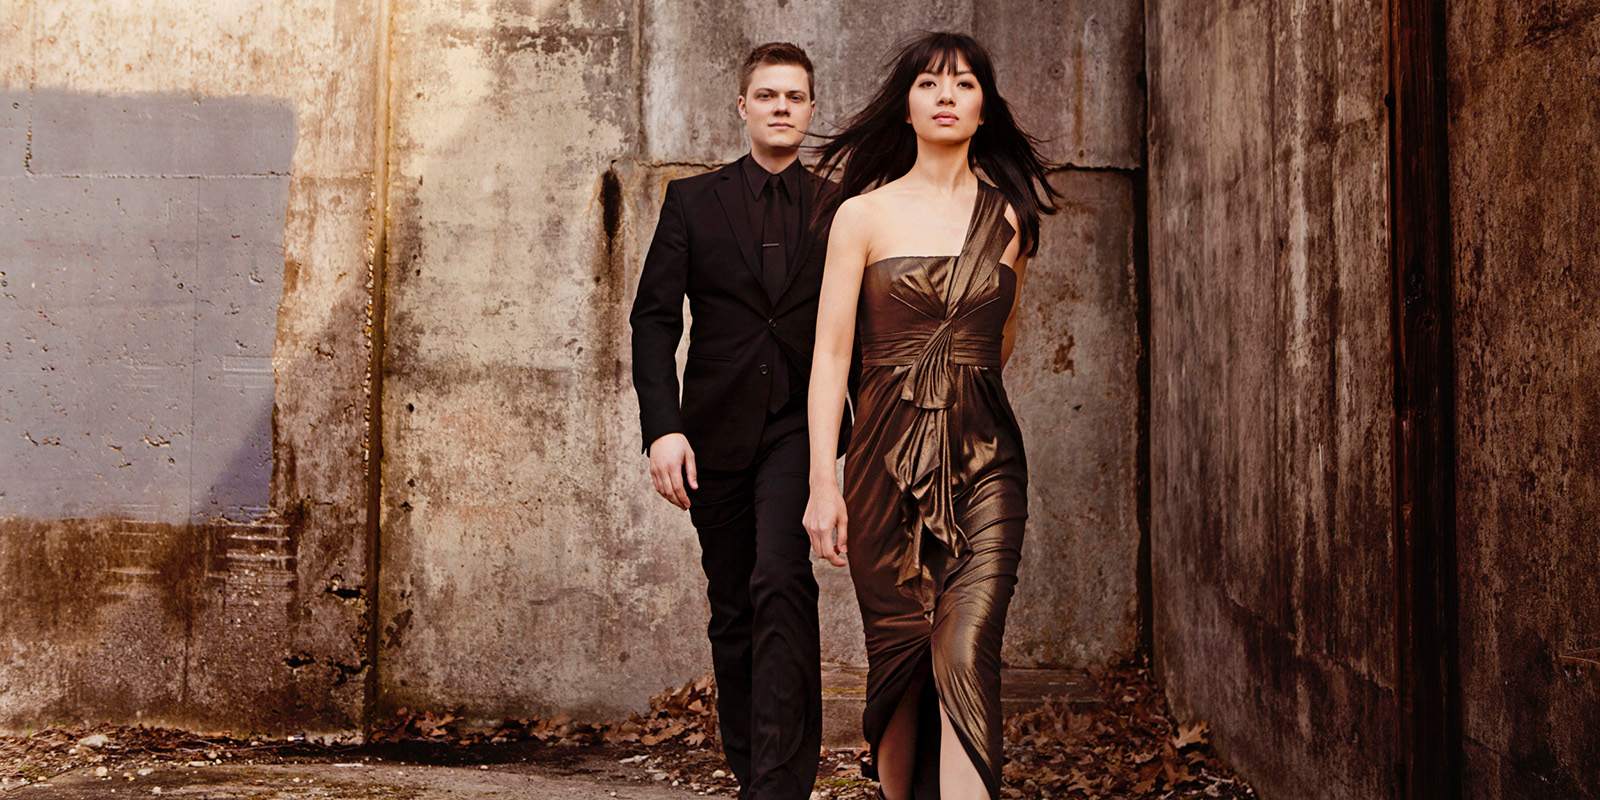 A man in a dark suit and a woman in a brown dress walk in an alleyway